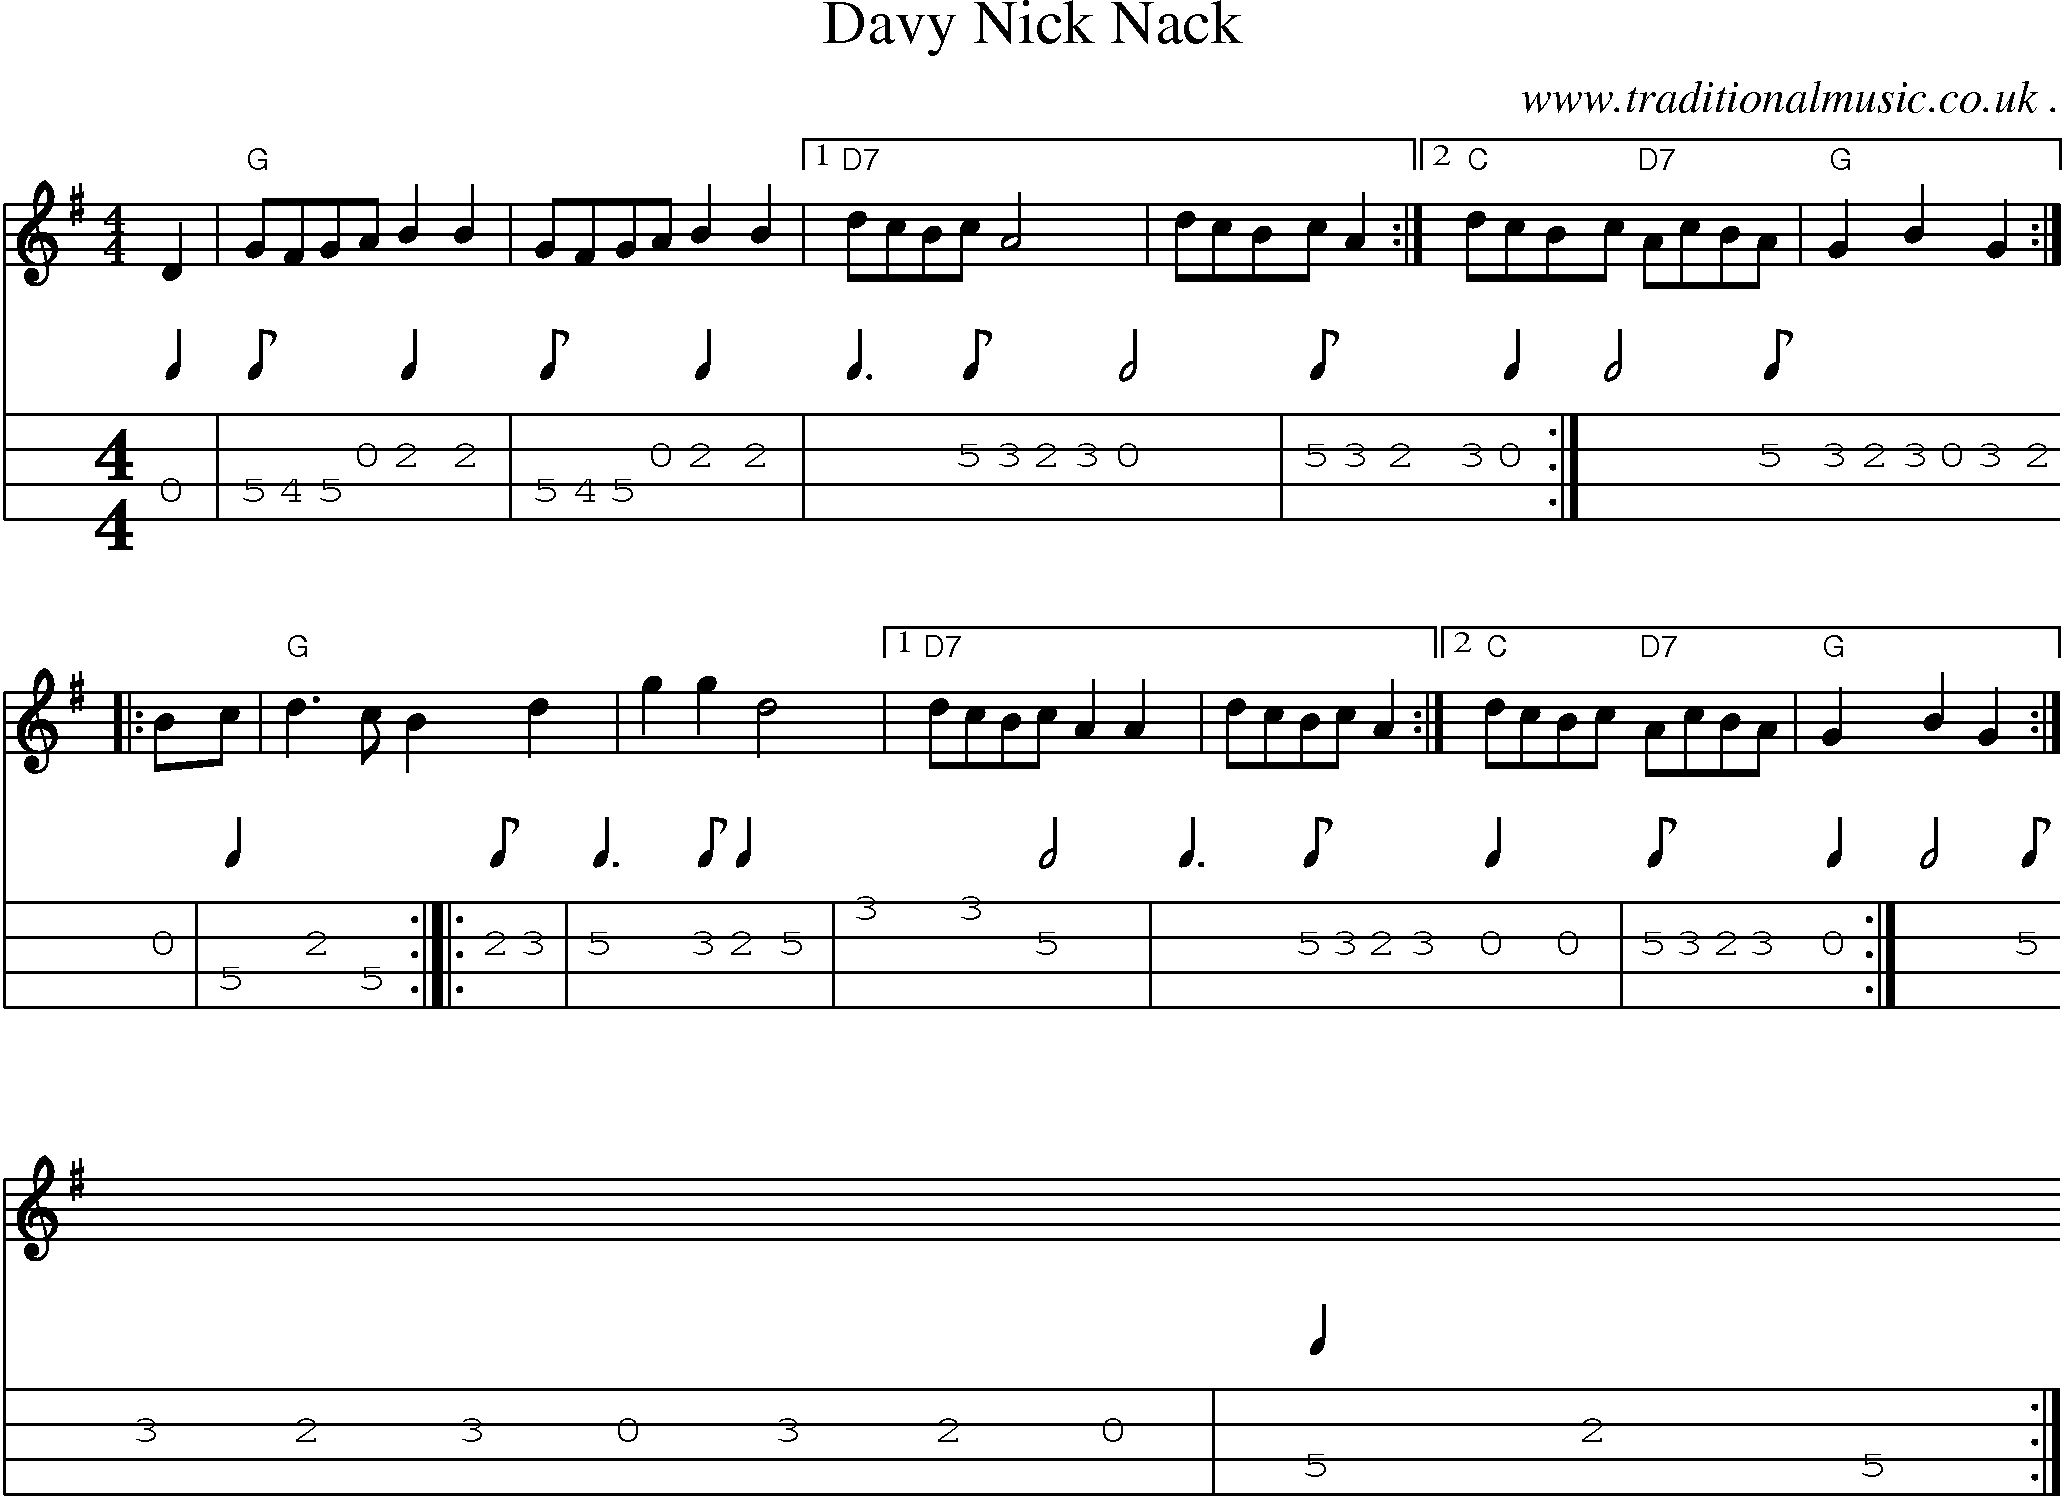 Sheet-music  score, Chords and Mandolin Tabs for Davy Nick Nack